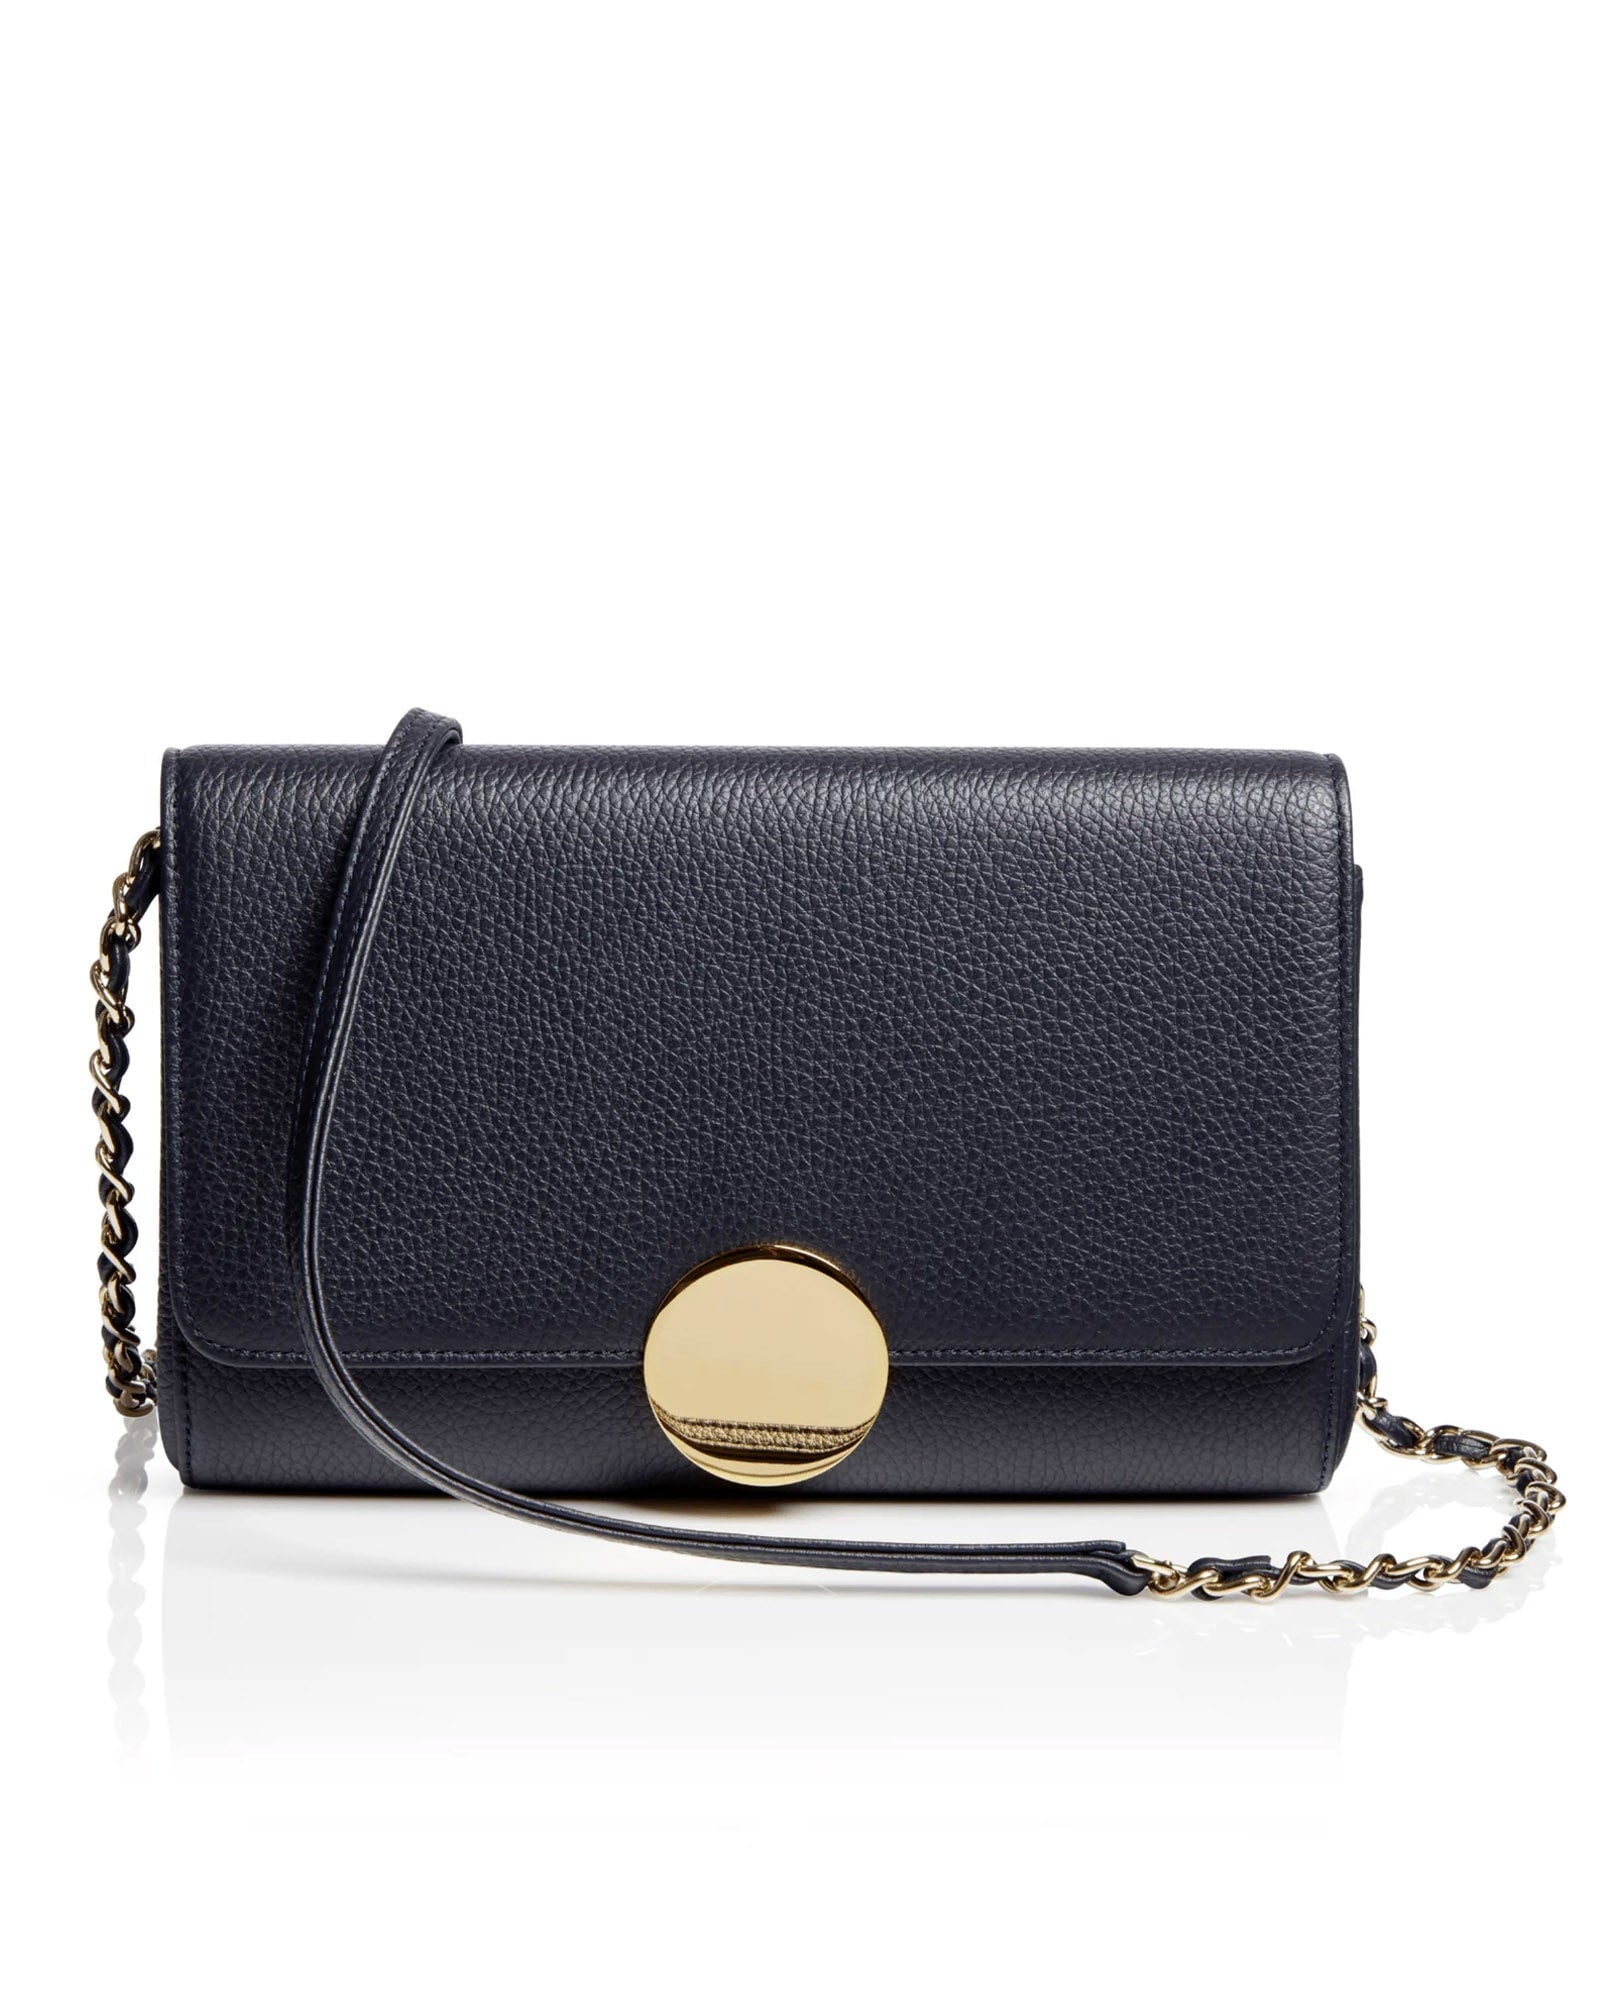 Naomi Textured Dark Navy Leather Occasion Bag Leather Clutch Bag  image